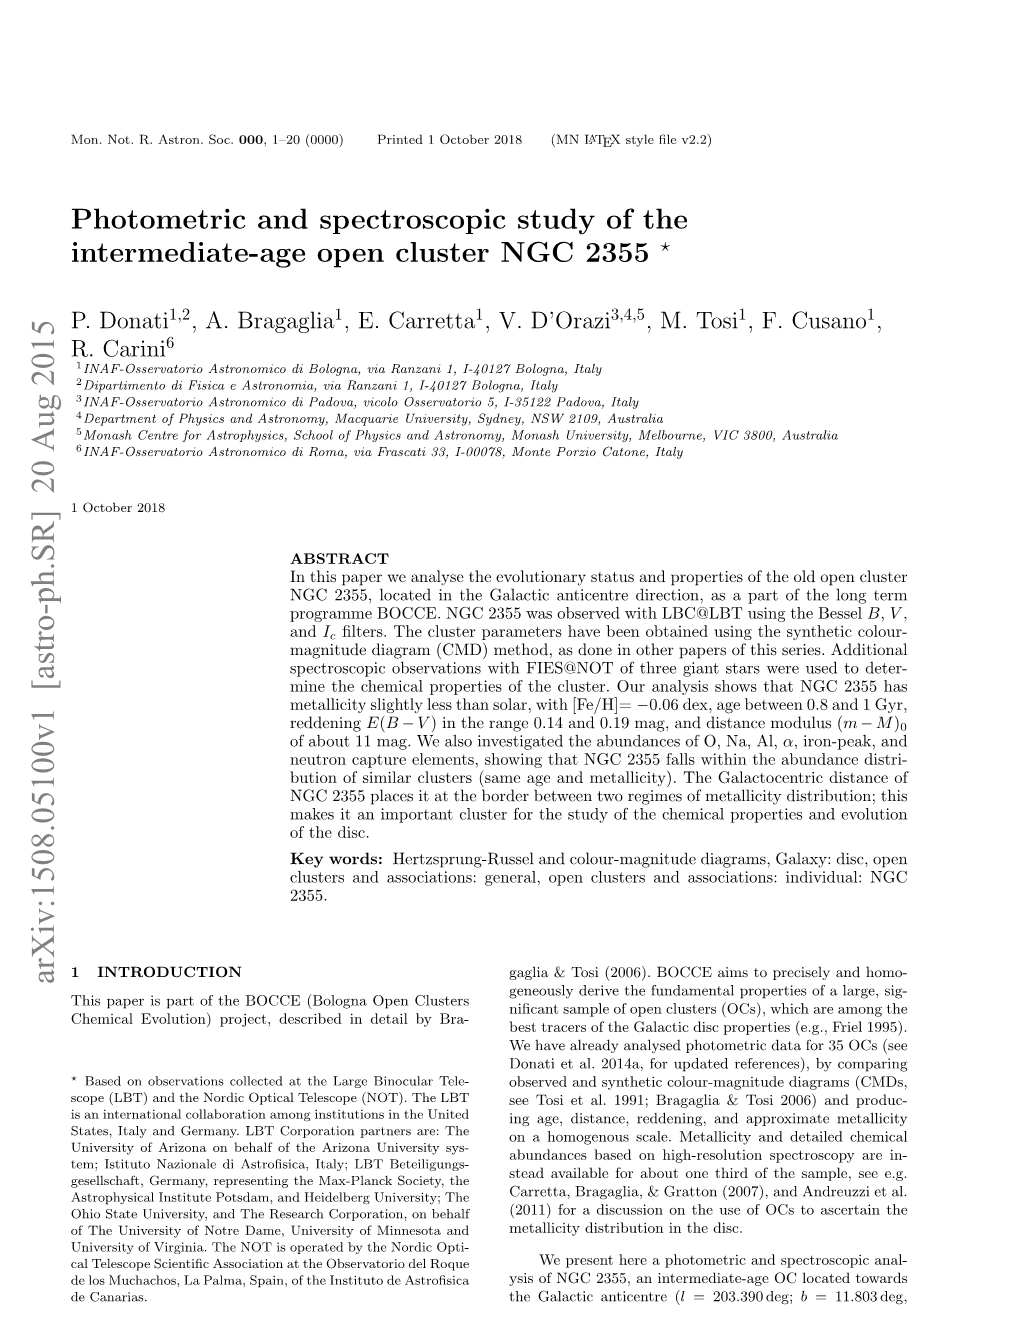 Photometric and Spectroscopic Study of the Intermediate-Age Open Cluster NGC 2355 ?